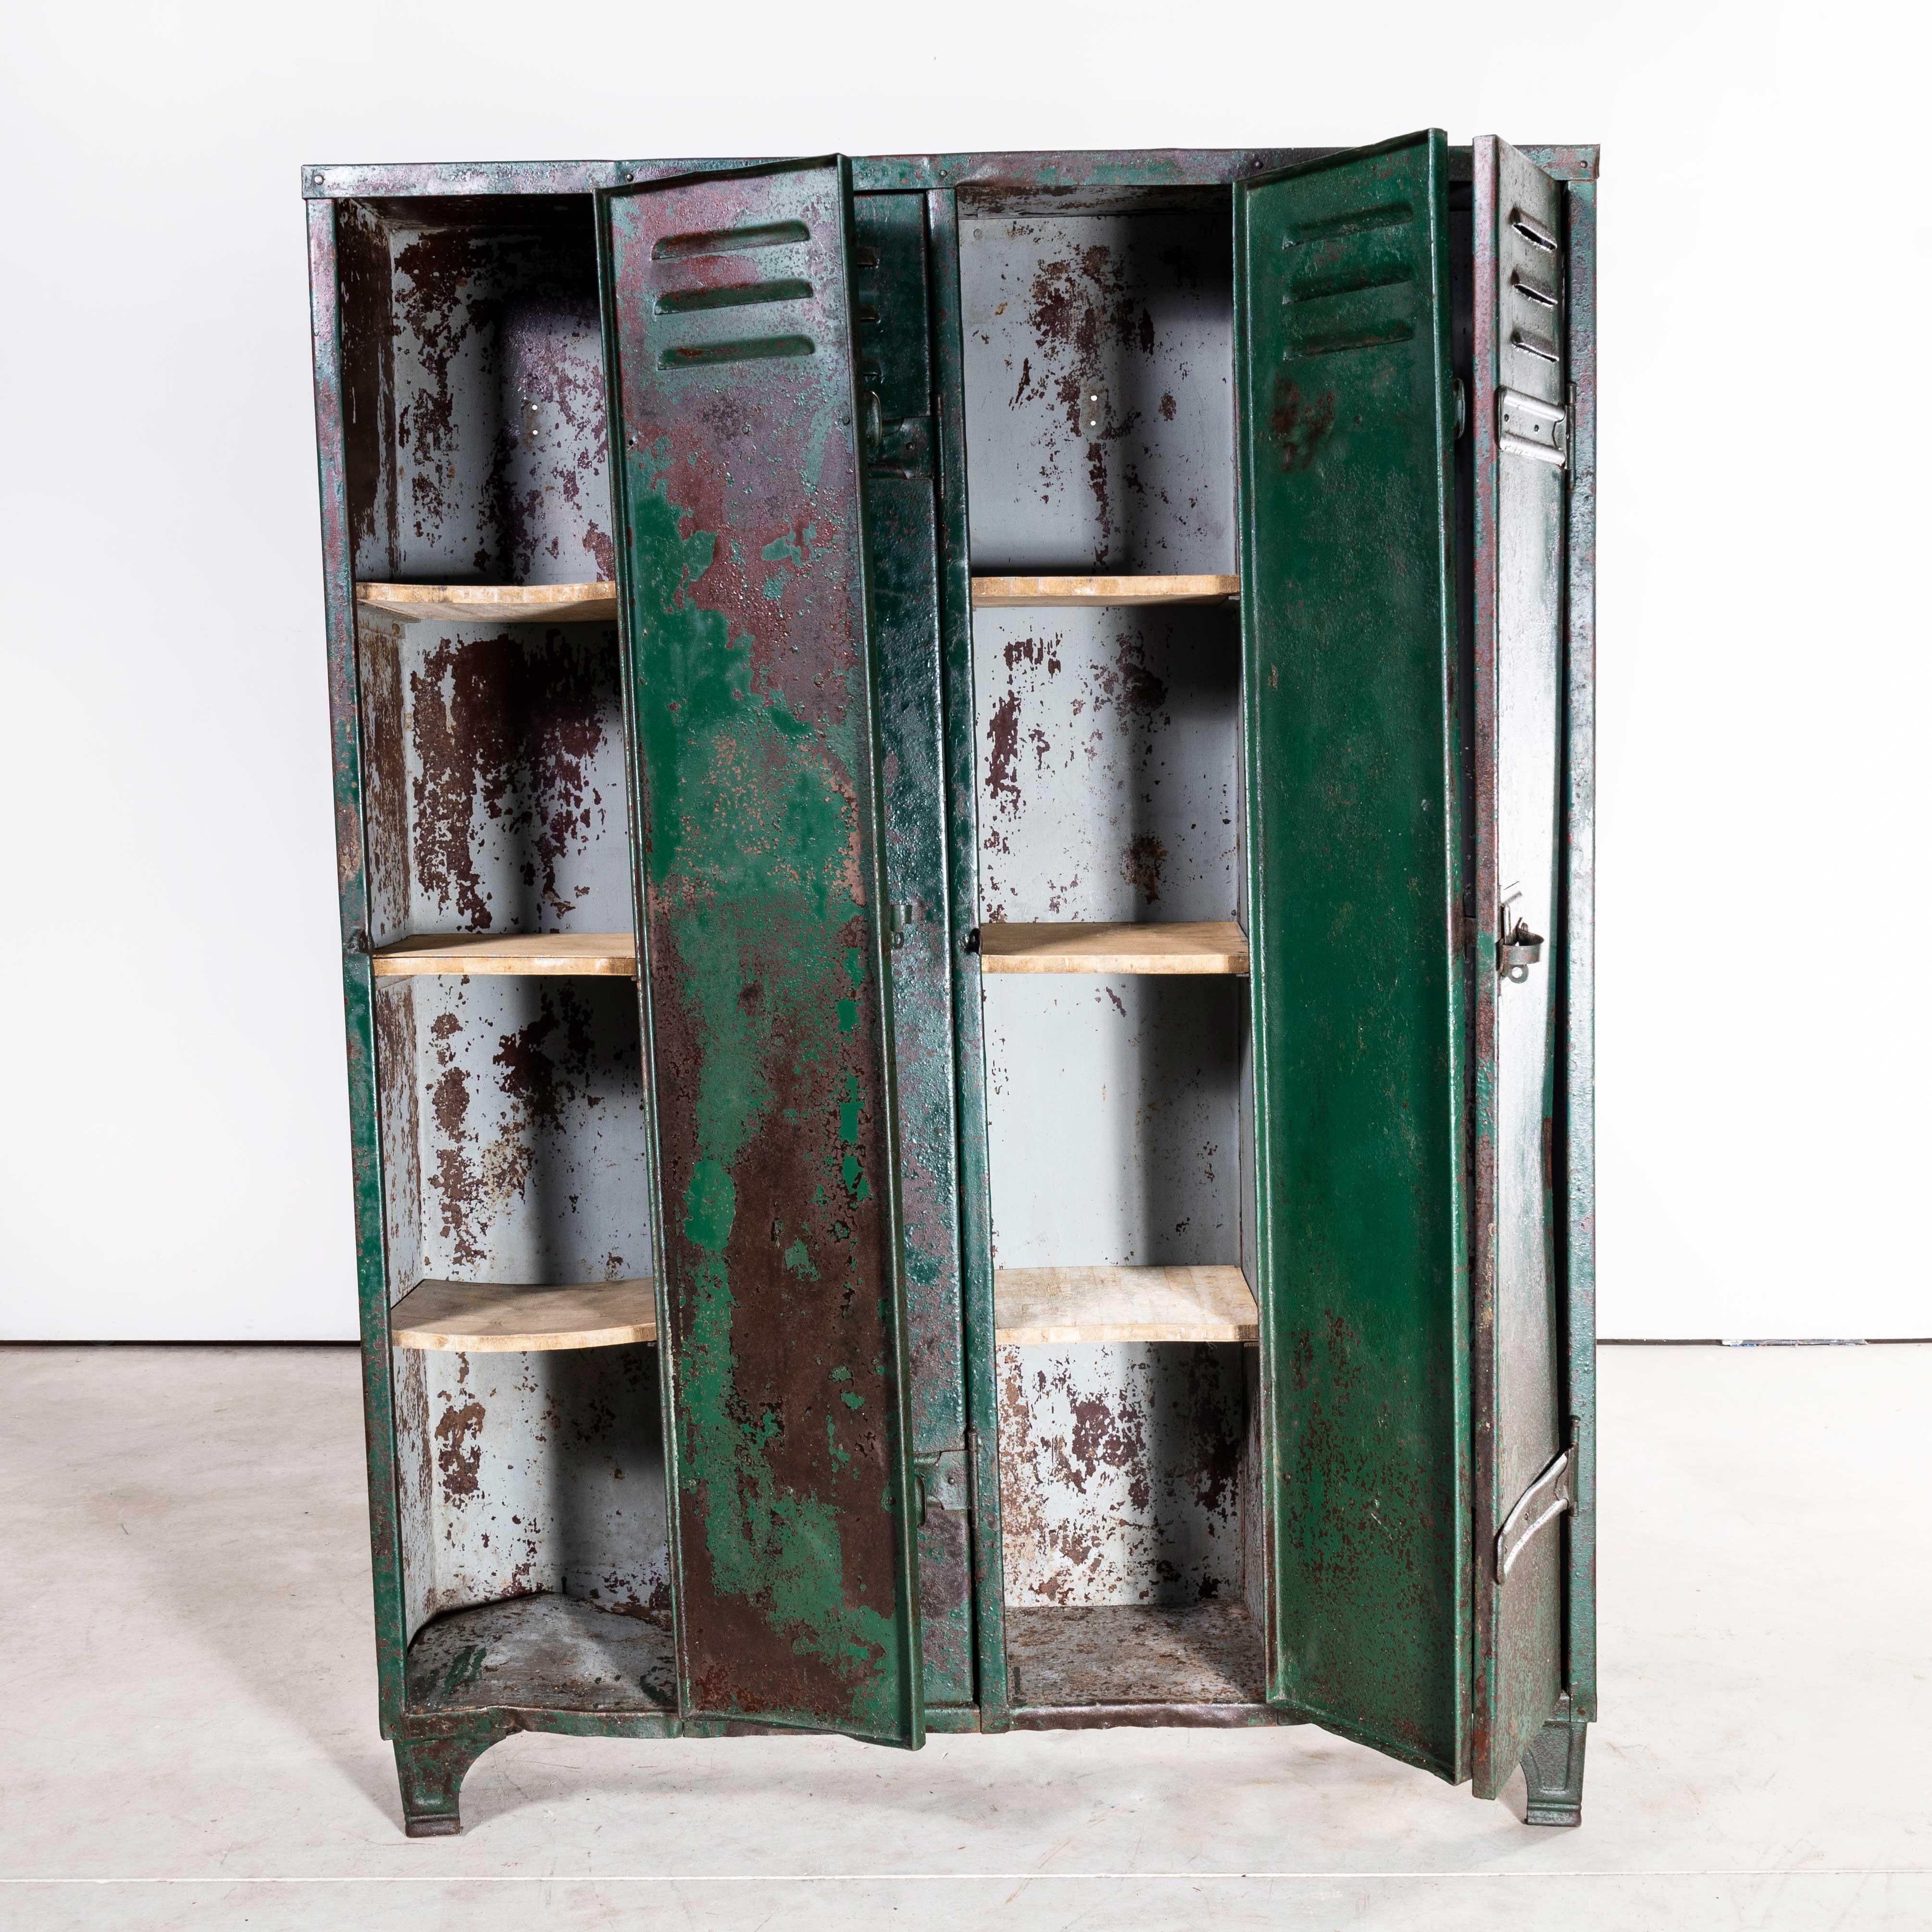 1940s heavy duty french steel Industrial locker – four door
1940s heavy duty french steel Industrial locker – four door – this four door locker is an exceptional and very rare piece retaining its original paint. The doors all open and shut well and